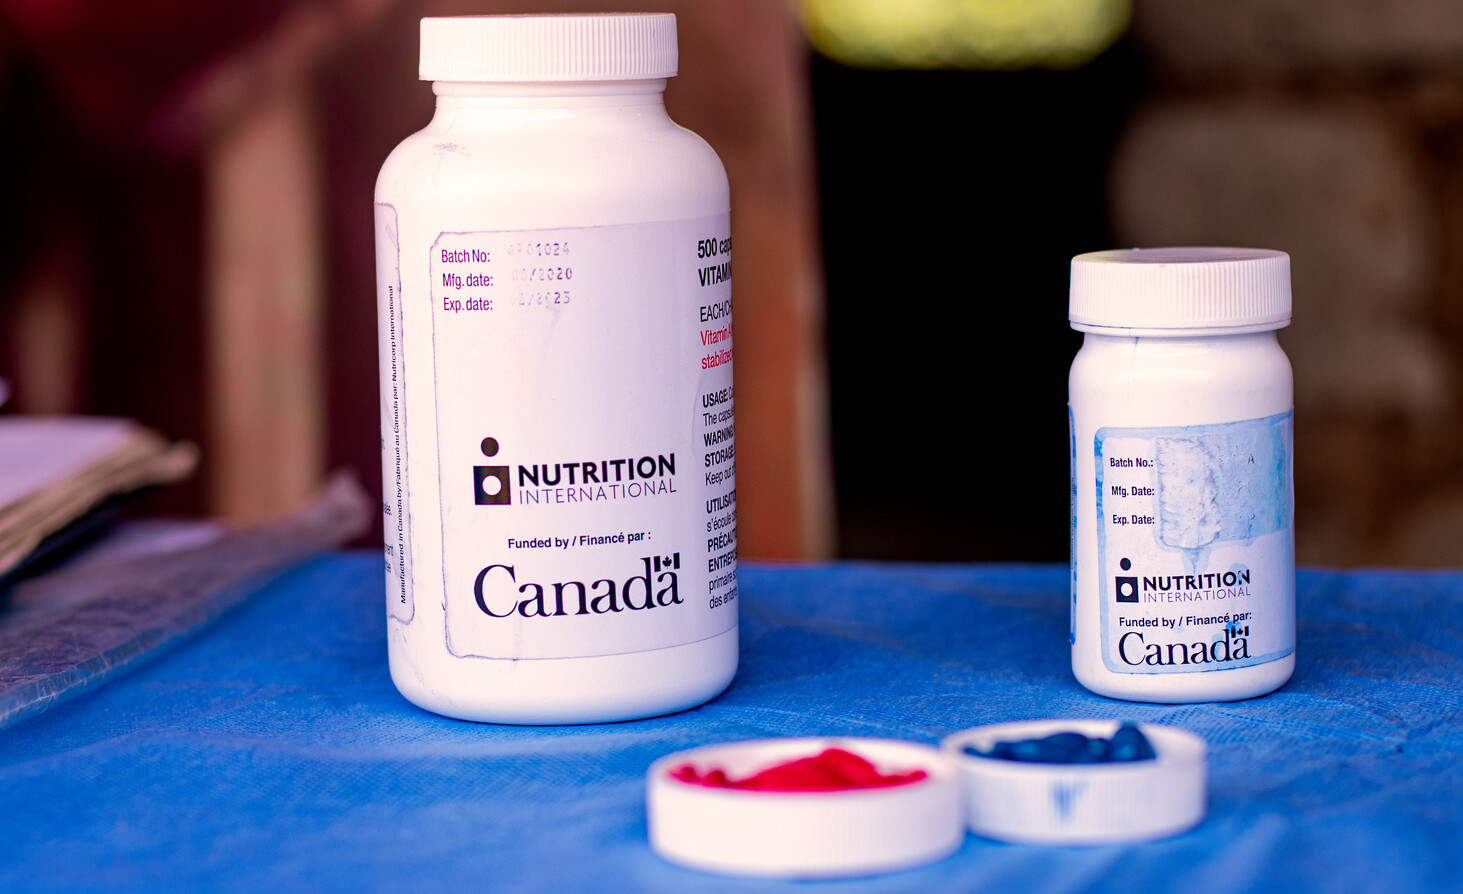 Blue and red vitamin A capsules lie in a bottle lid on top of a blue table alongside the Nutrition International and Government of Canada branded bottles.